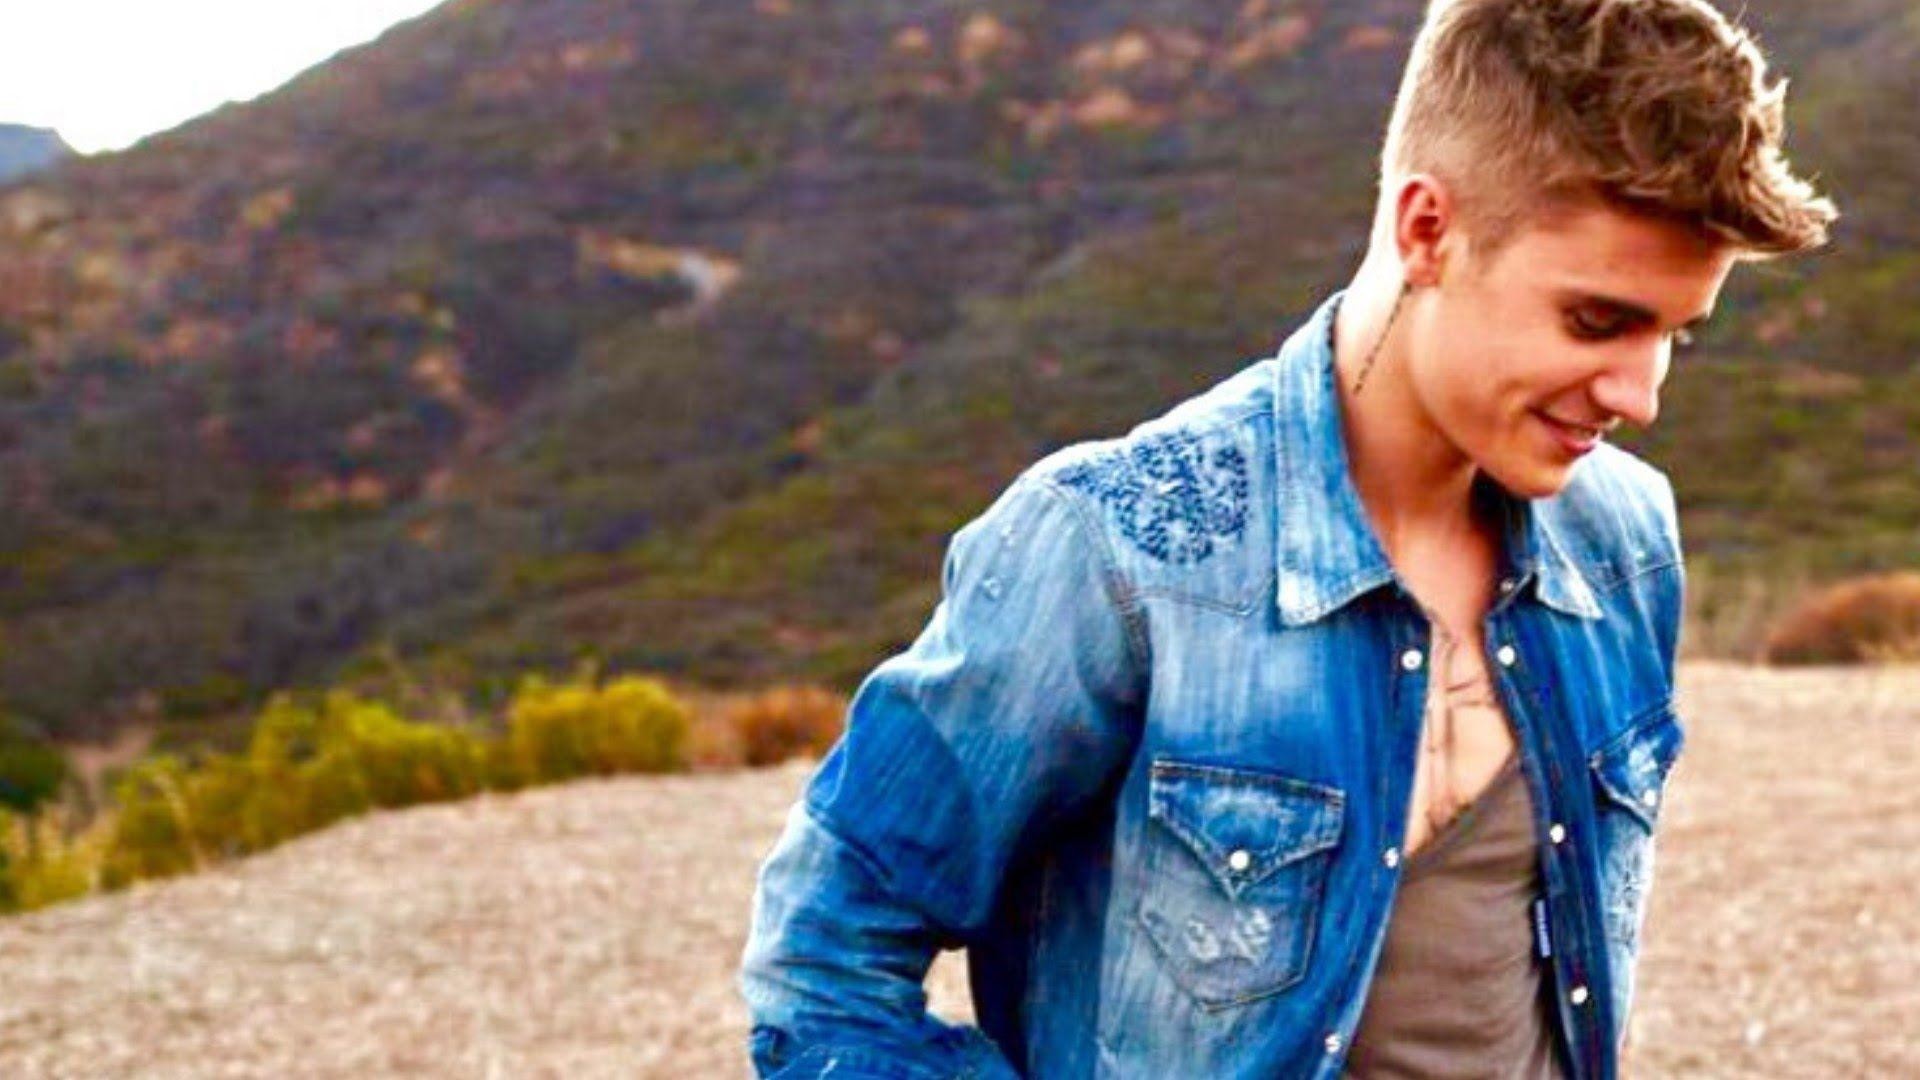 1920x1080 justin bieber hd wallpaper 2017. See Also : TAYLOR SWIFT HD WALLPAPERS